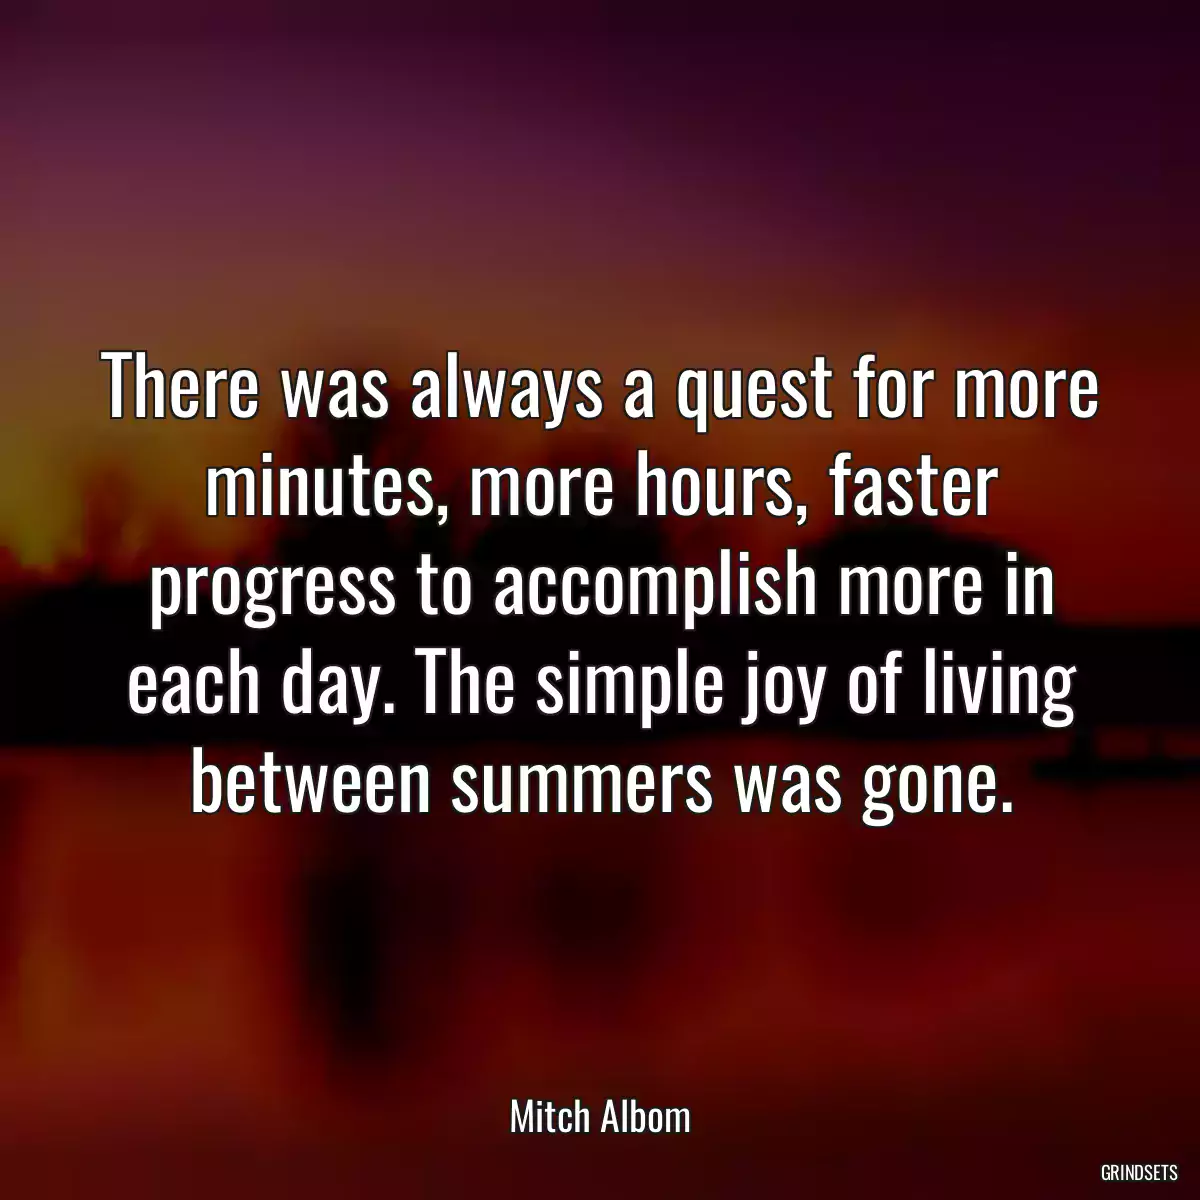 There was always a quest for more minutes, more hours, faster progress to accomplish more in each day. The simple joy of living between summers was gone.